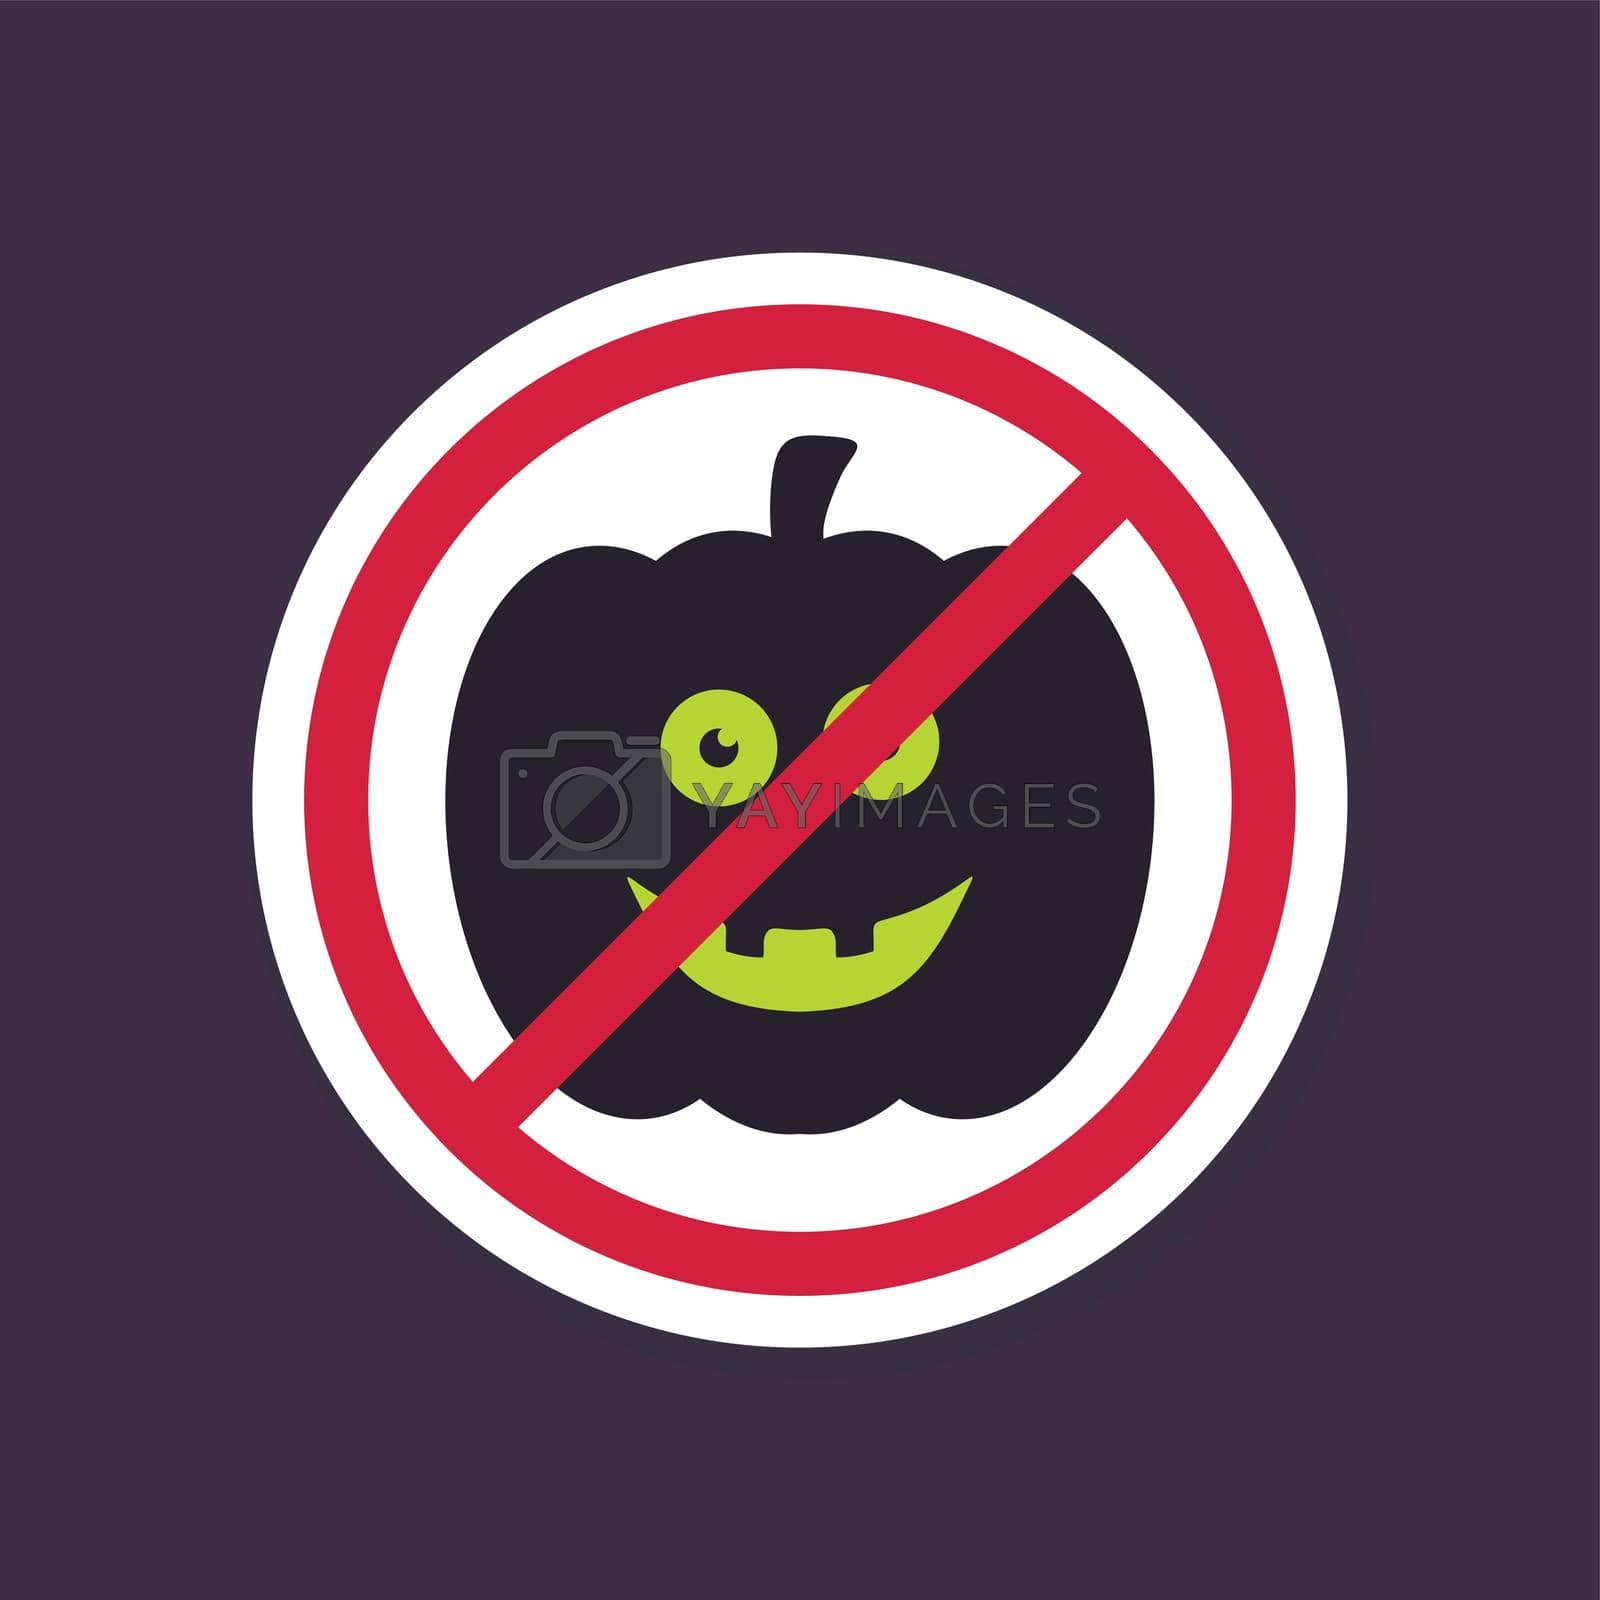 Royalty free image of No, Ban or Stop signs. Halloween pumpkins icon by nosik